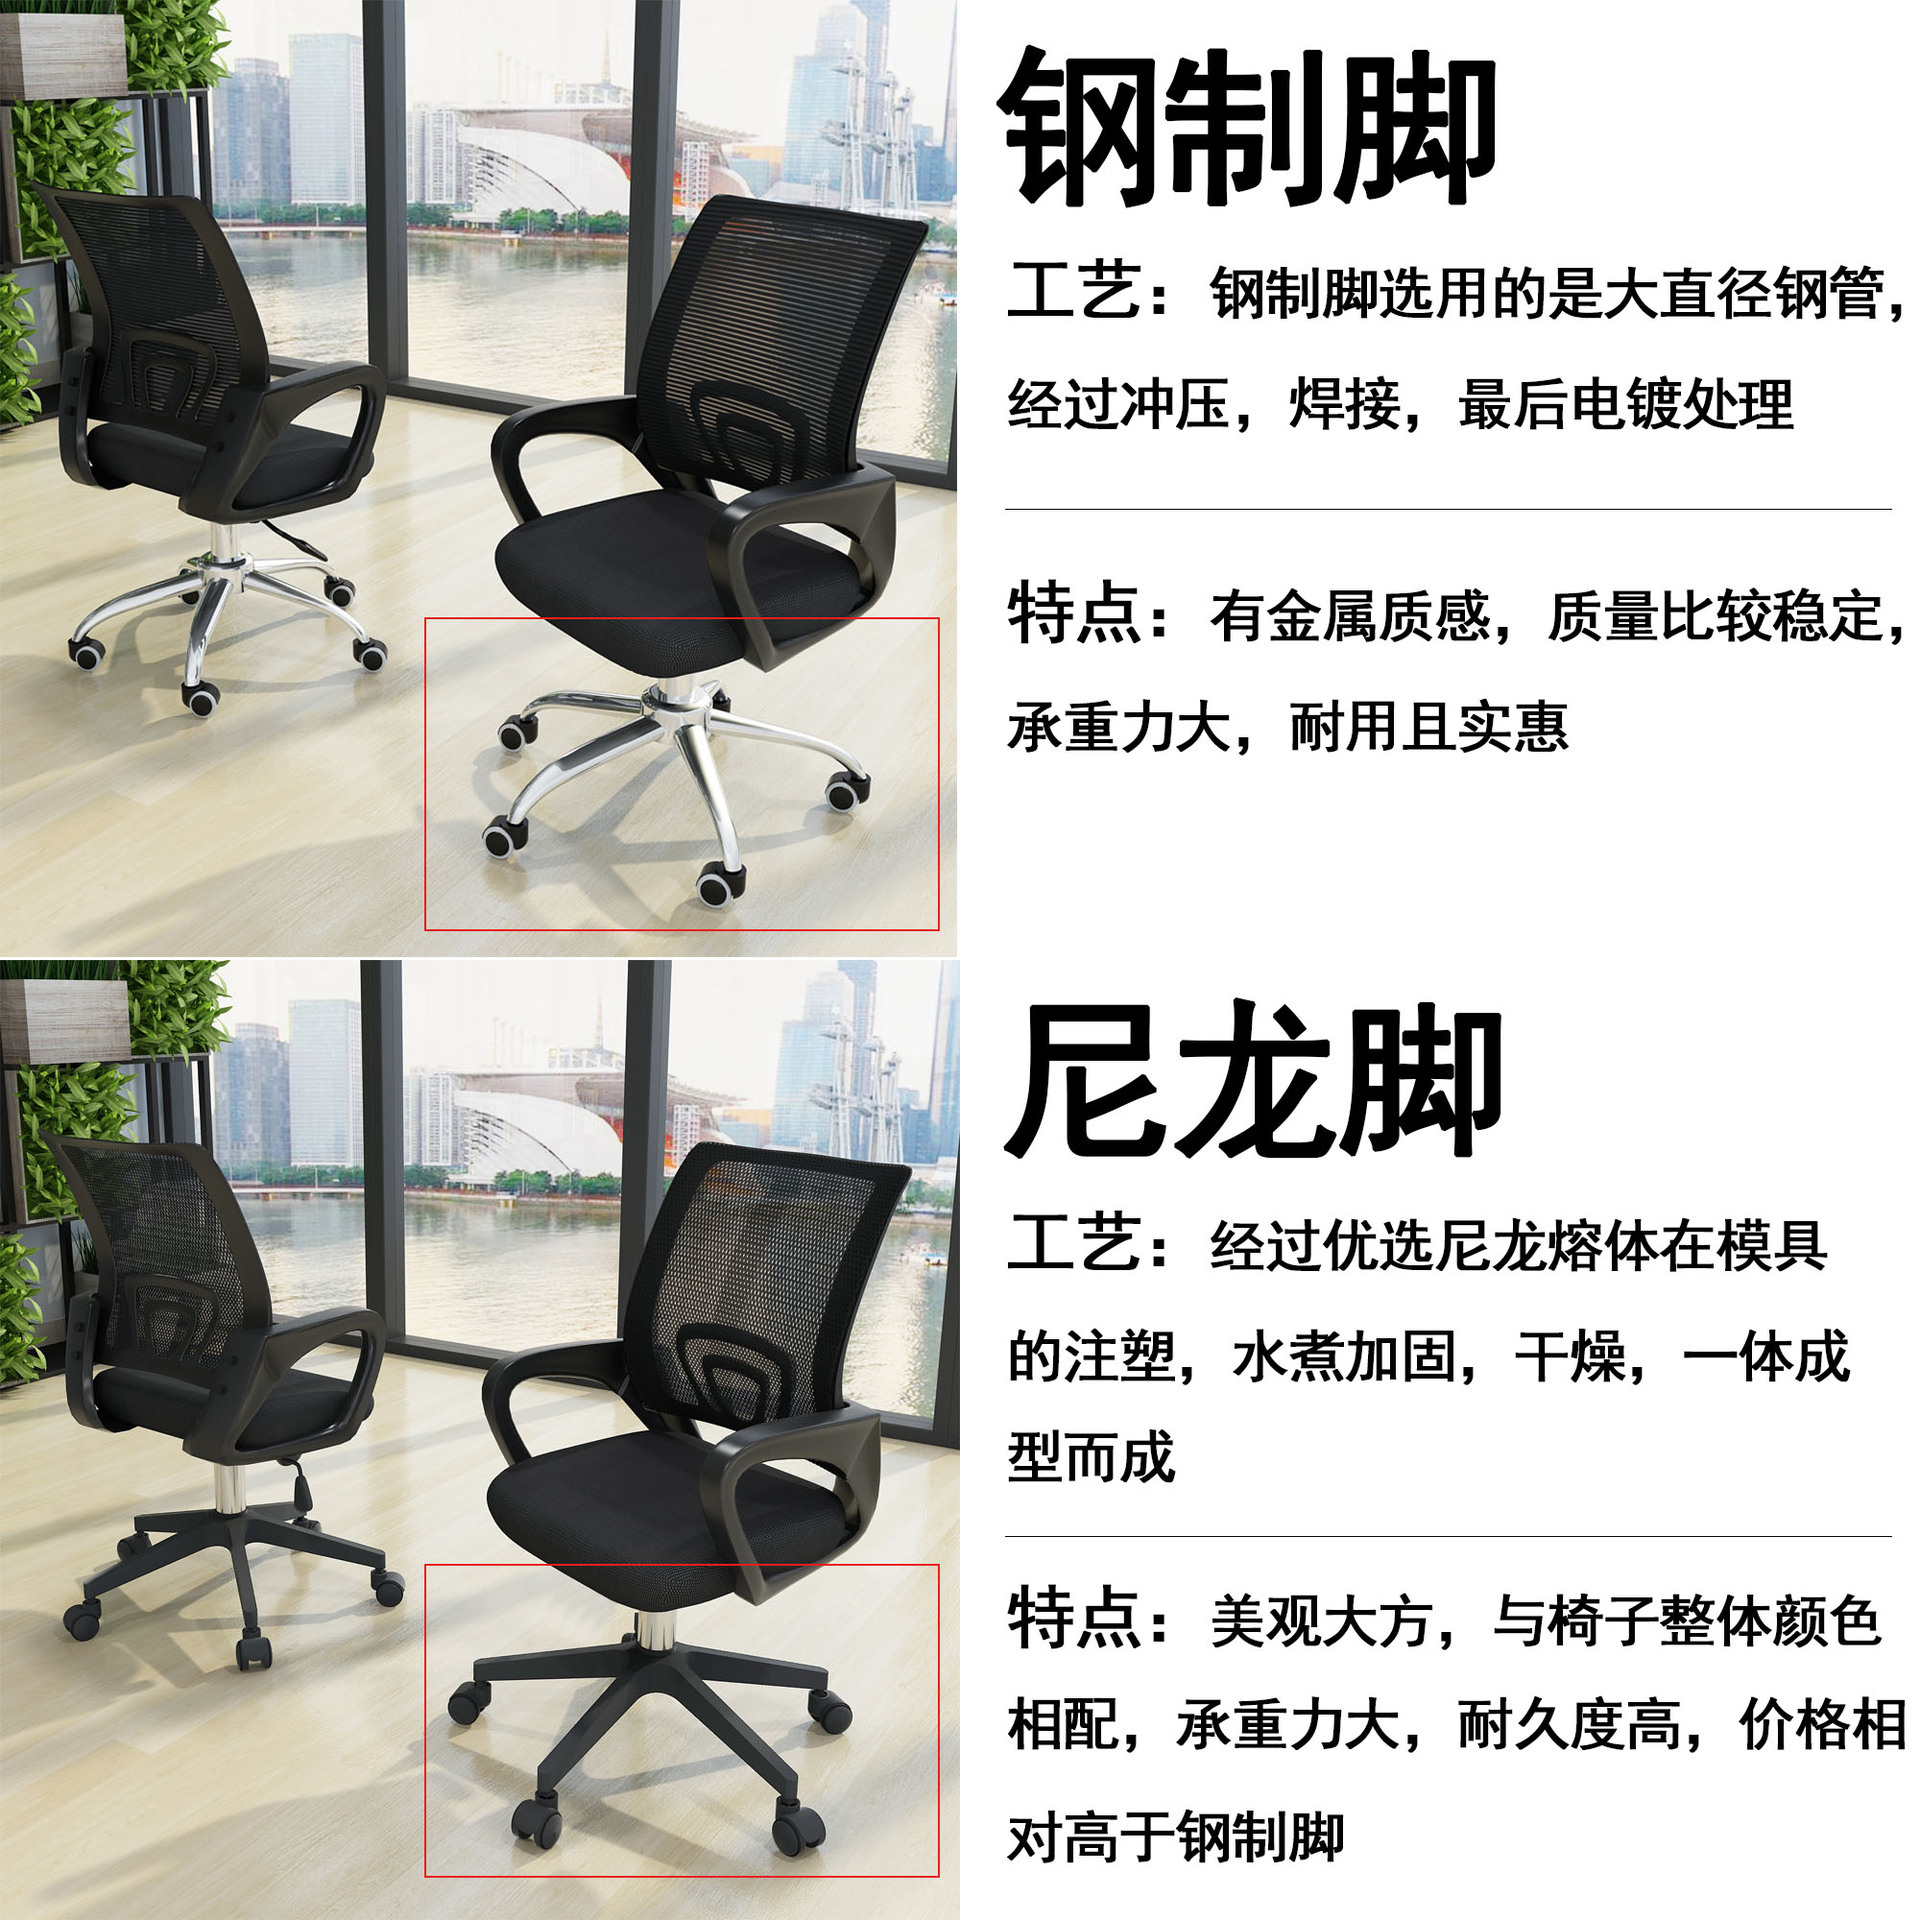 Factory Tmall Signature Computer Chair for Home & Office Use Chair Student Swivel Chair Conference Chair Office Chair